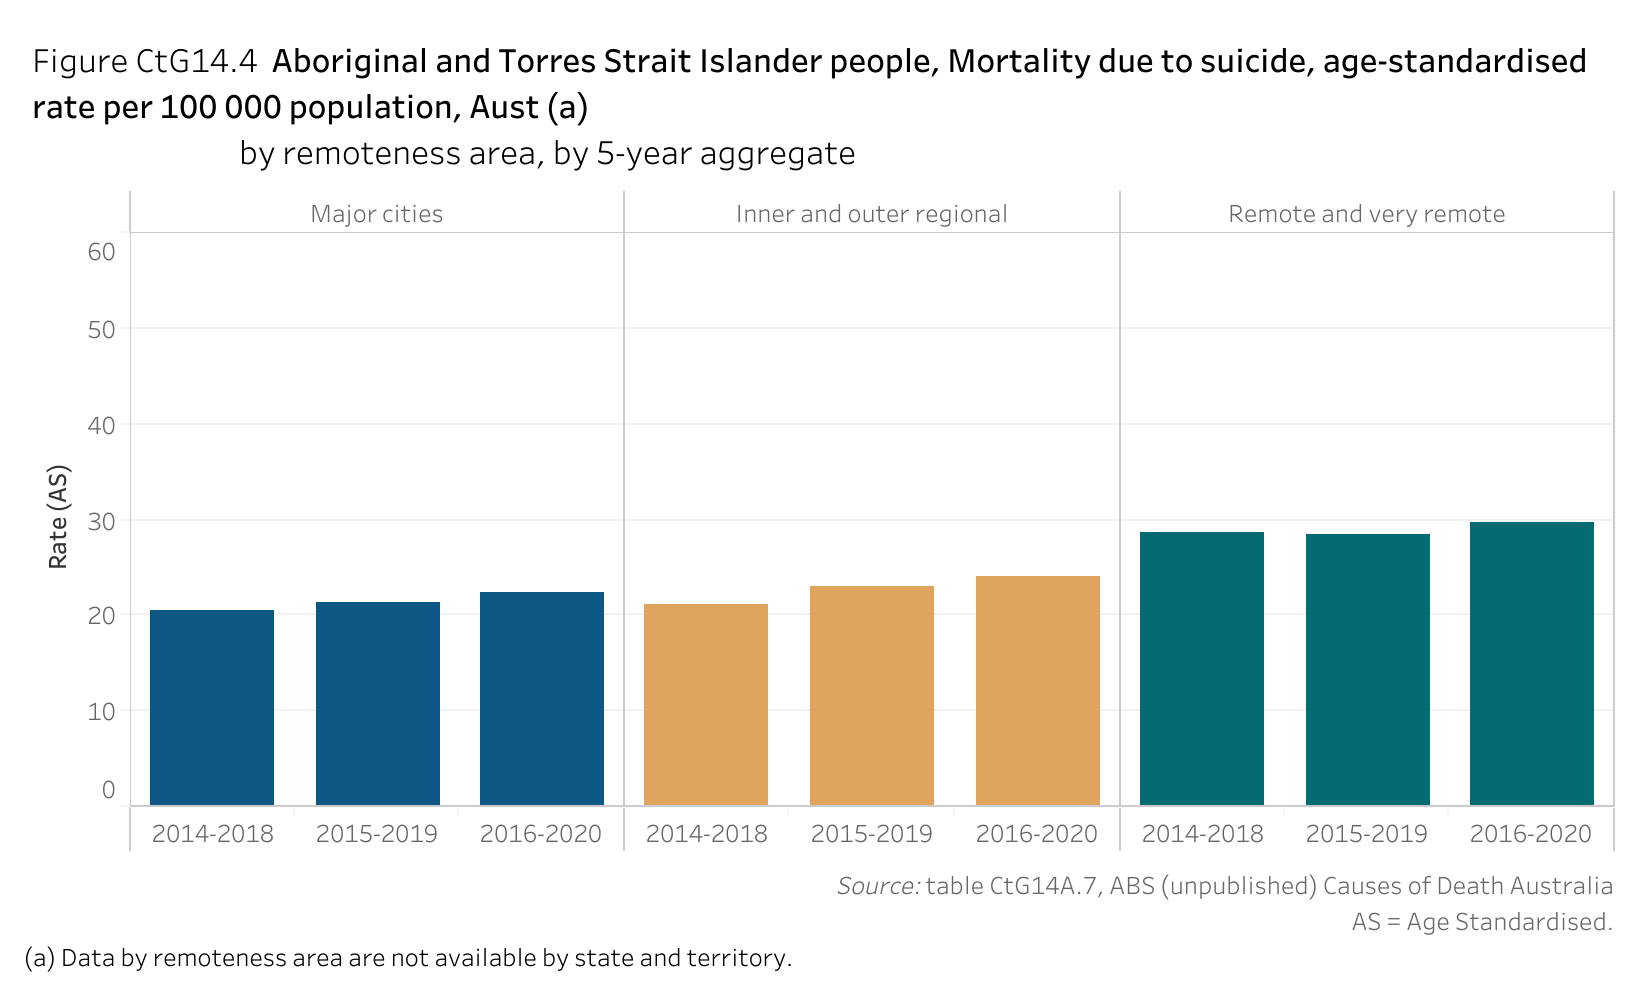 Figure CtG14.4. Bar chart showing the age-standardised rate of mortality due to suicide of Aboriginal and Torres Strait Islander people per 100 000 population in Australia, by remoteness area and by 5-year aggregate. Data table of figure CtG14.4 is below.